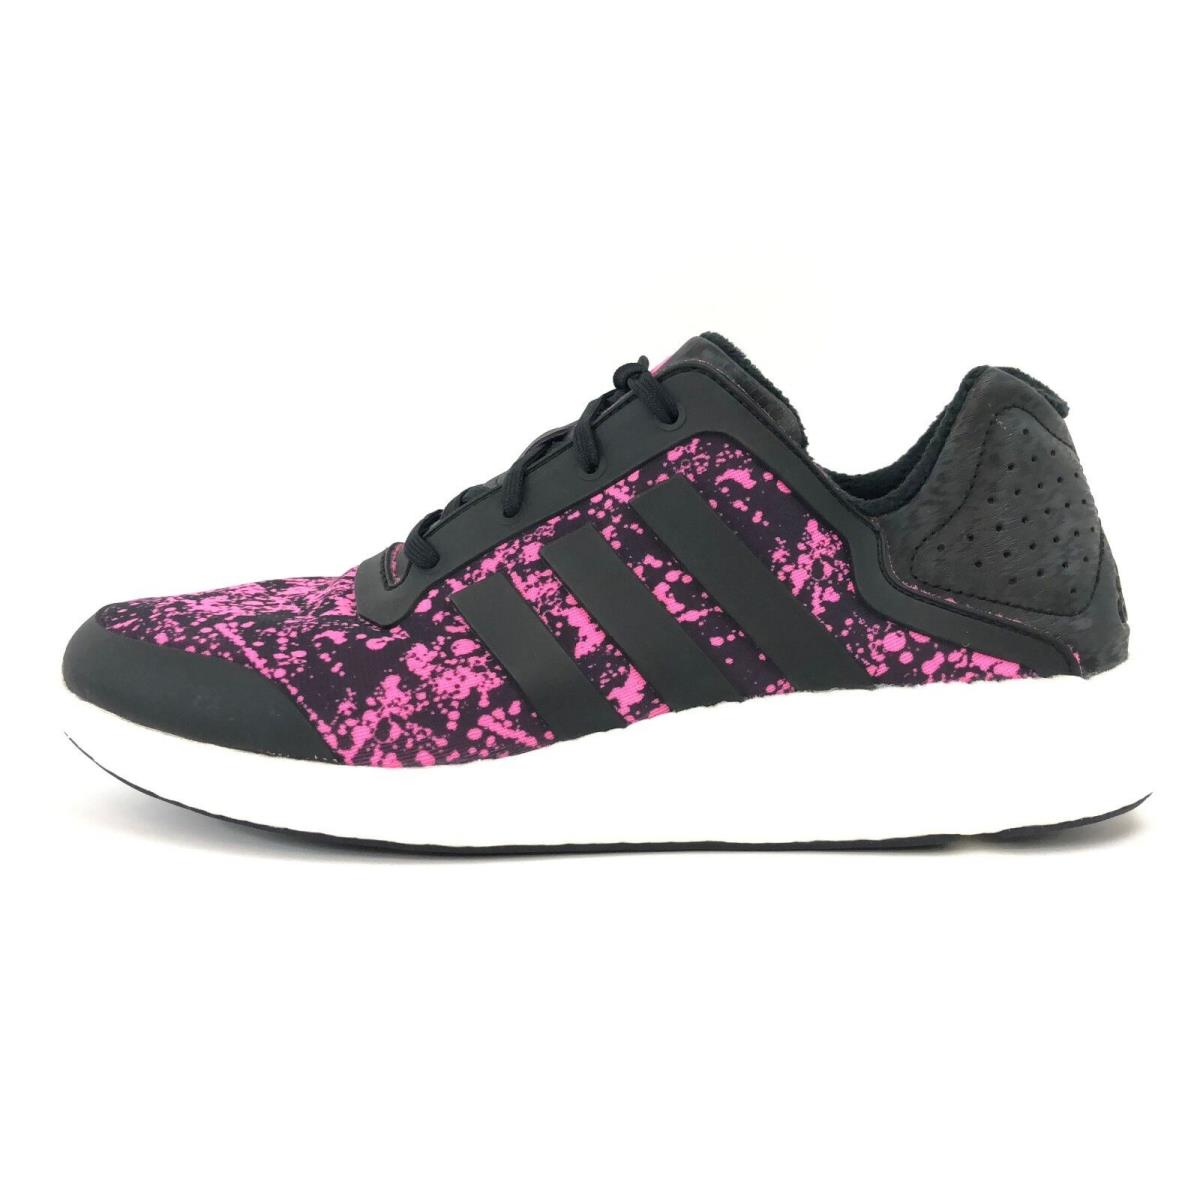 Adidas Women`s Pure Boost Core Black Pink Gym Running Shoes M21406